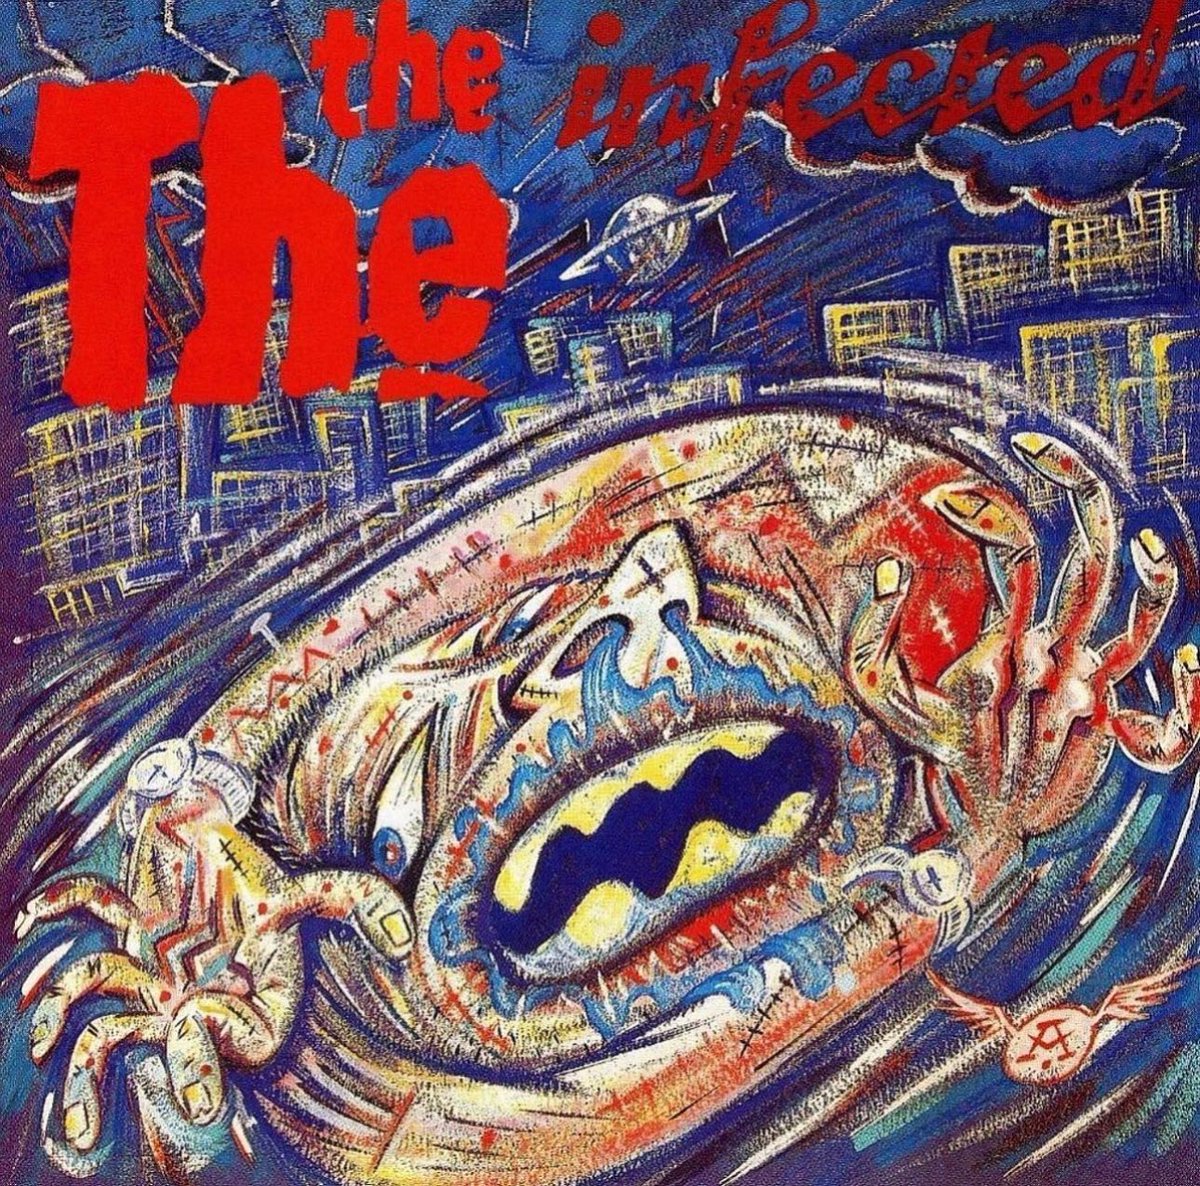 Released in the UK on this day in 1986, ‘Infected’ is the 2nd album by @thethe . Featuring singles 'Heartland,” 'Slow Train to Dawn,” “Sweet Bird of Truth,” and the title track w/ @misscherrylala. The album would stay on the UK chart for 30 weeks. Happy 37th anniversary!